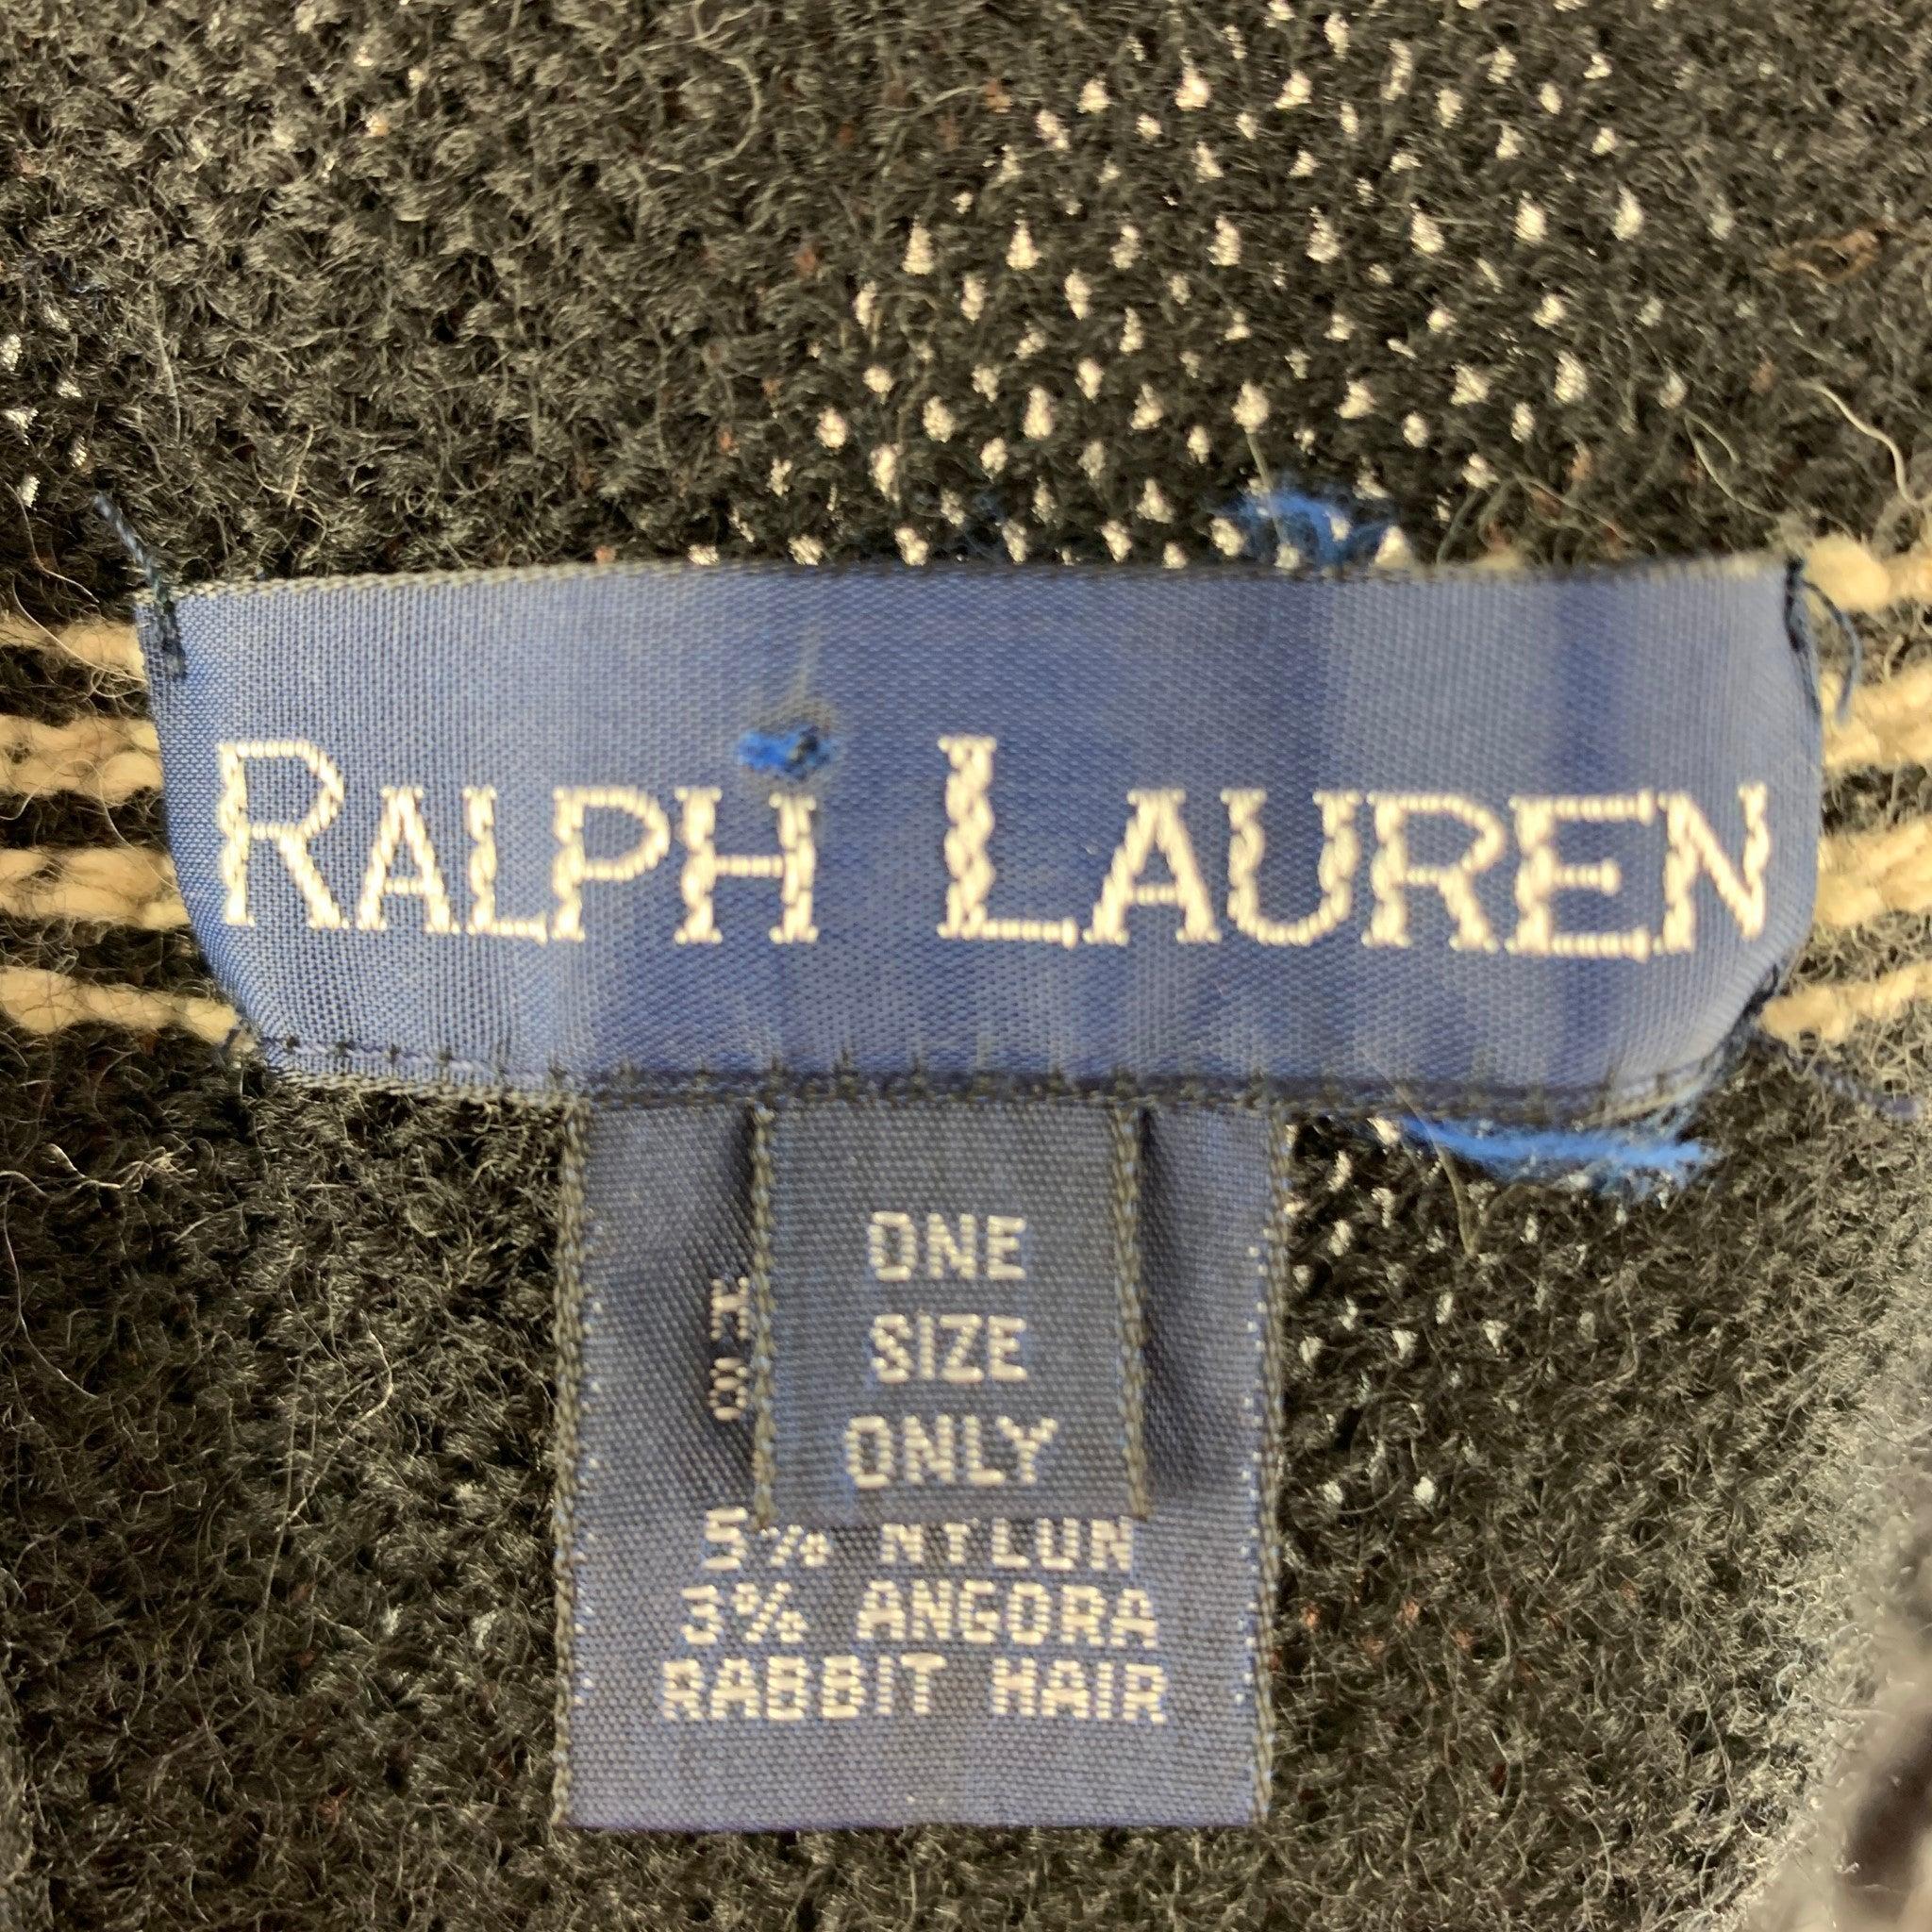 RALPH LAUREN BLUE LABEL Black Cream Knitted Wool Blend Scarf In Good Condition For Sale In San Francisco, CA